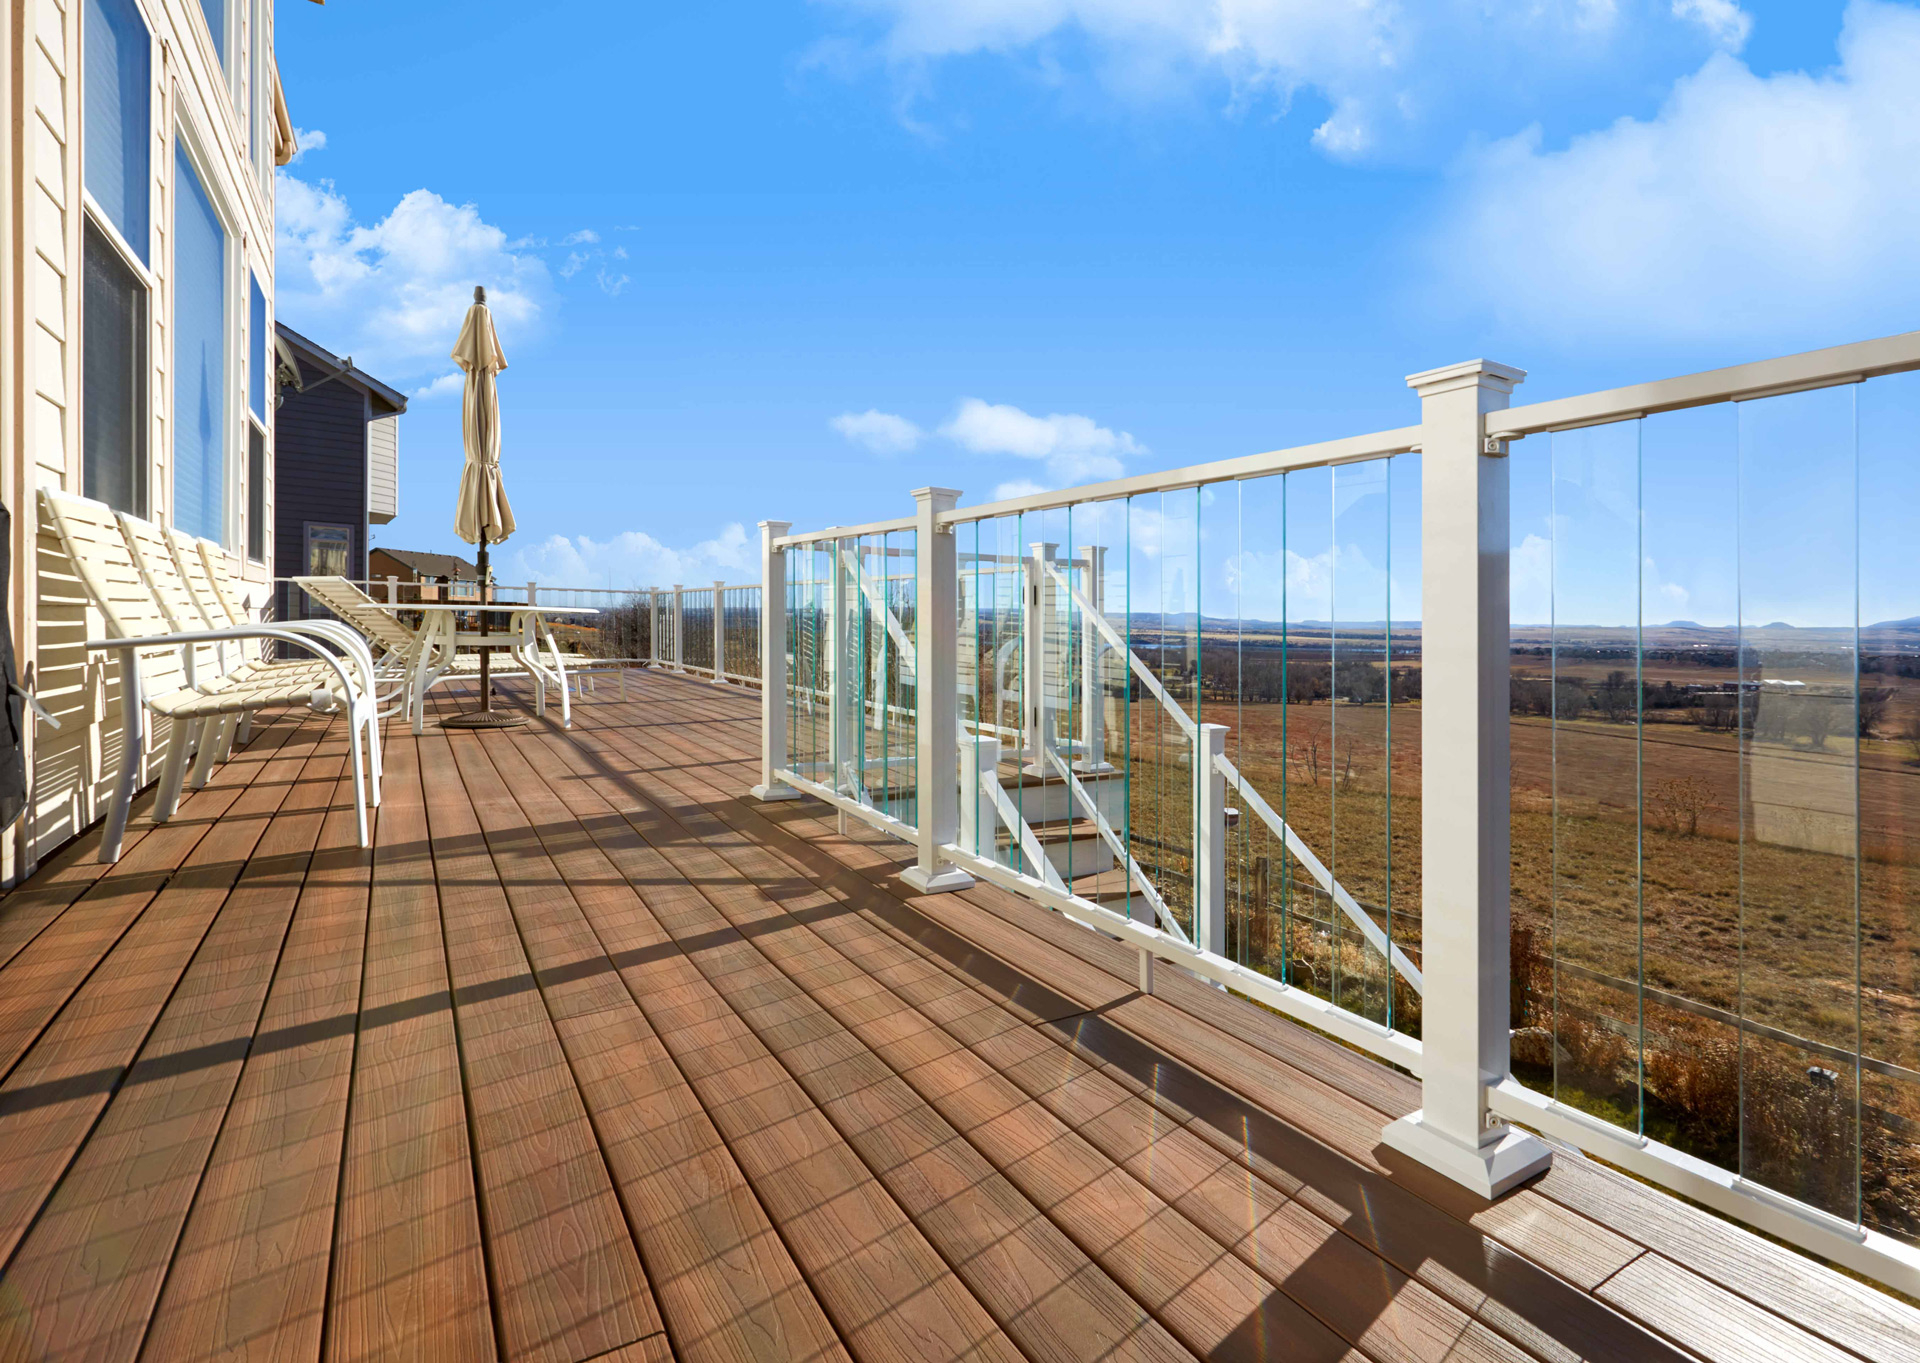 glass railing on composite decking